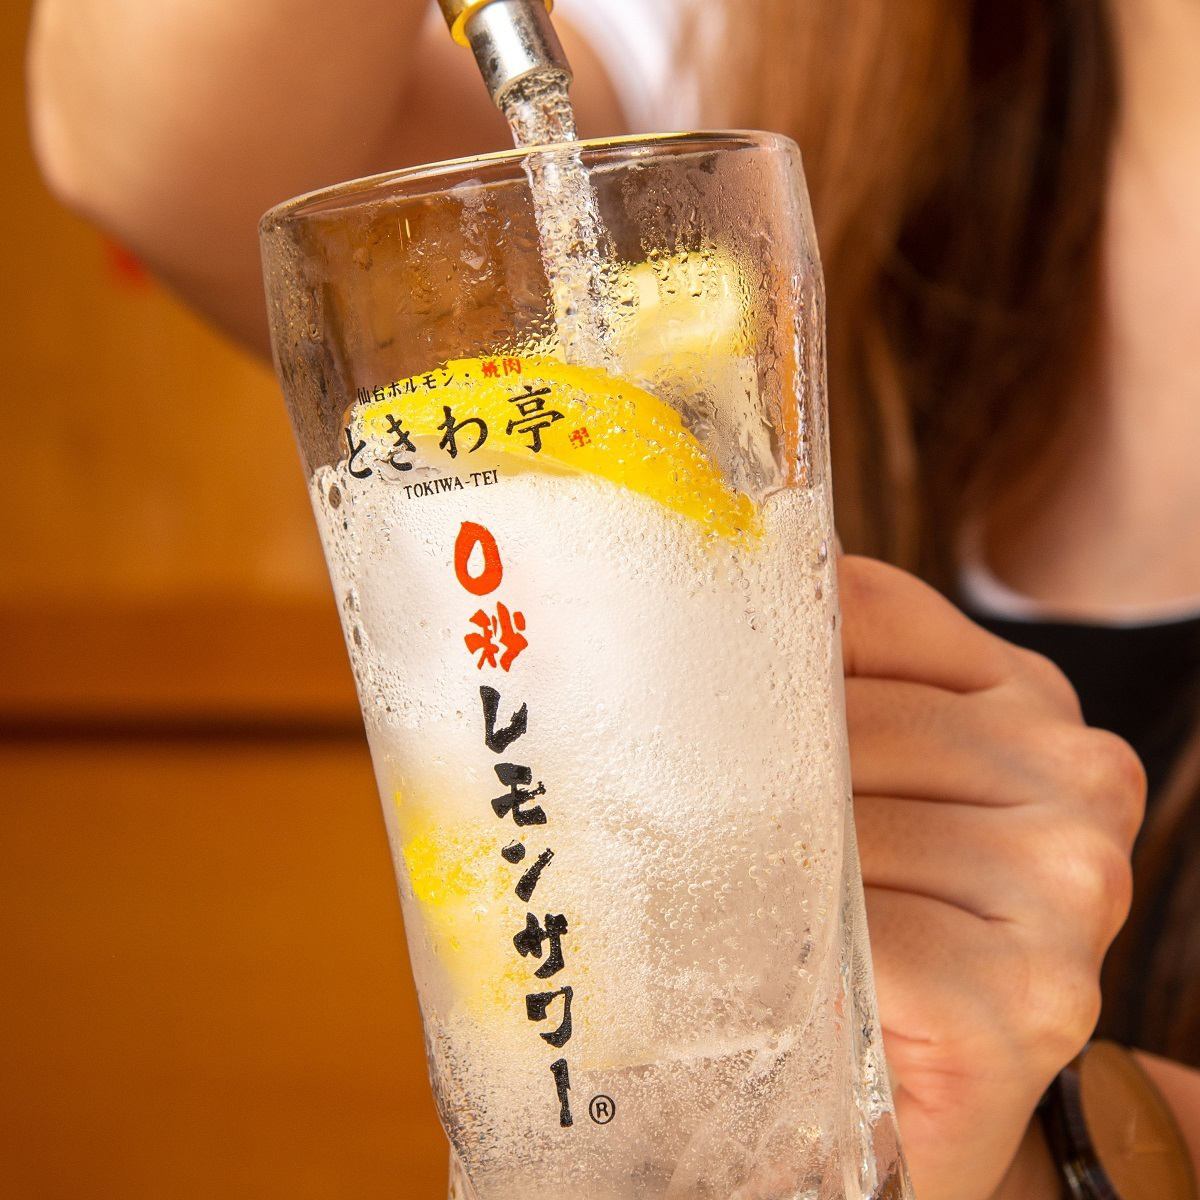 Tokiwatei's specialty, the 60-minute lemon sour all-you-can-drink for 500 yen! All-you-can-drink in 0 seconds!